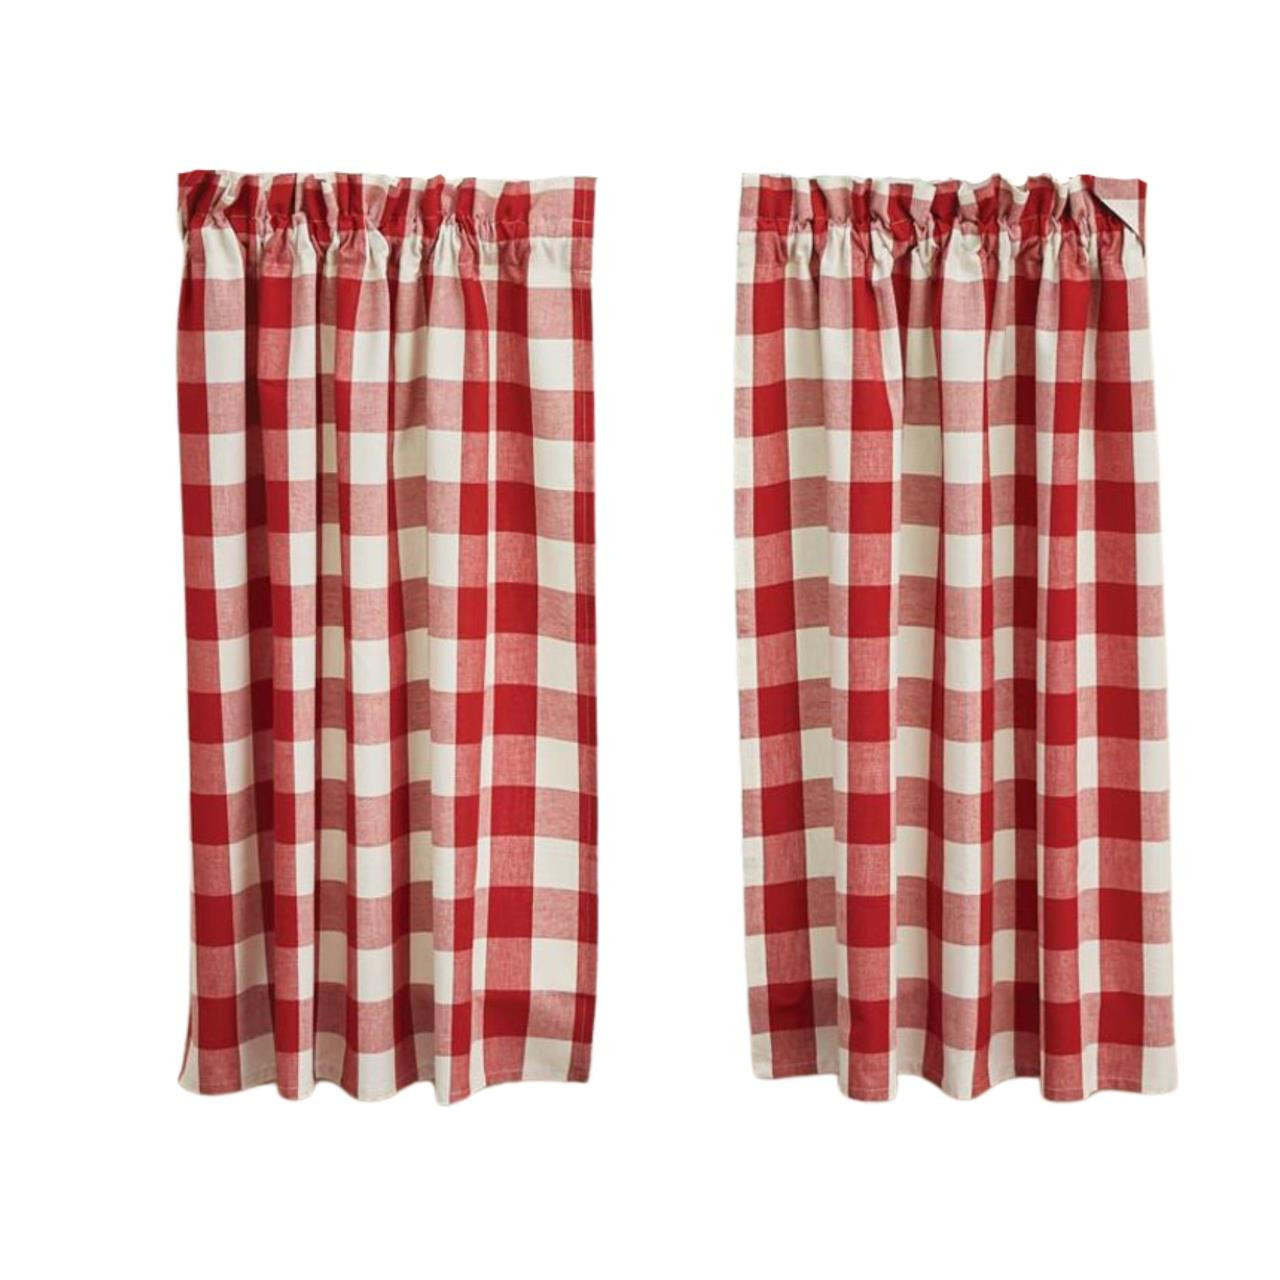 Wicklow Check Red & Cream Tiers - 72x36 - Country Village Shoppe